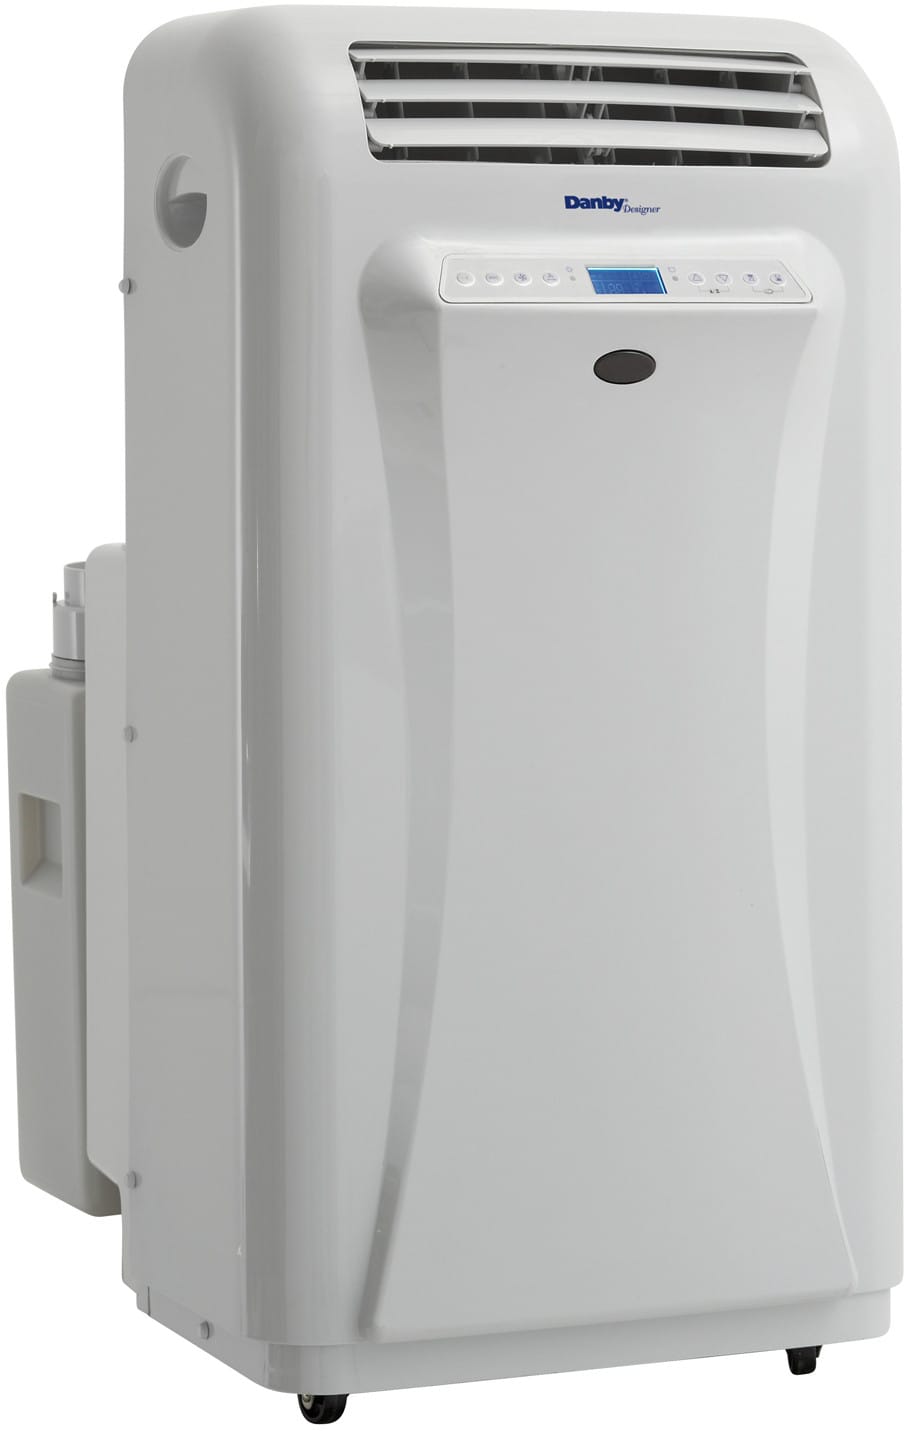 Danby DPAC120068 12,000 BTU Portable Air Conditioner with Electronic Controls, 70 Pt 